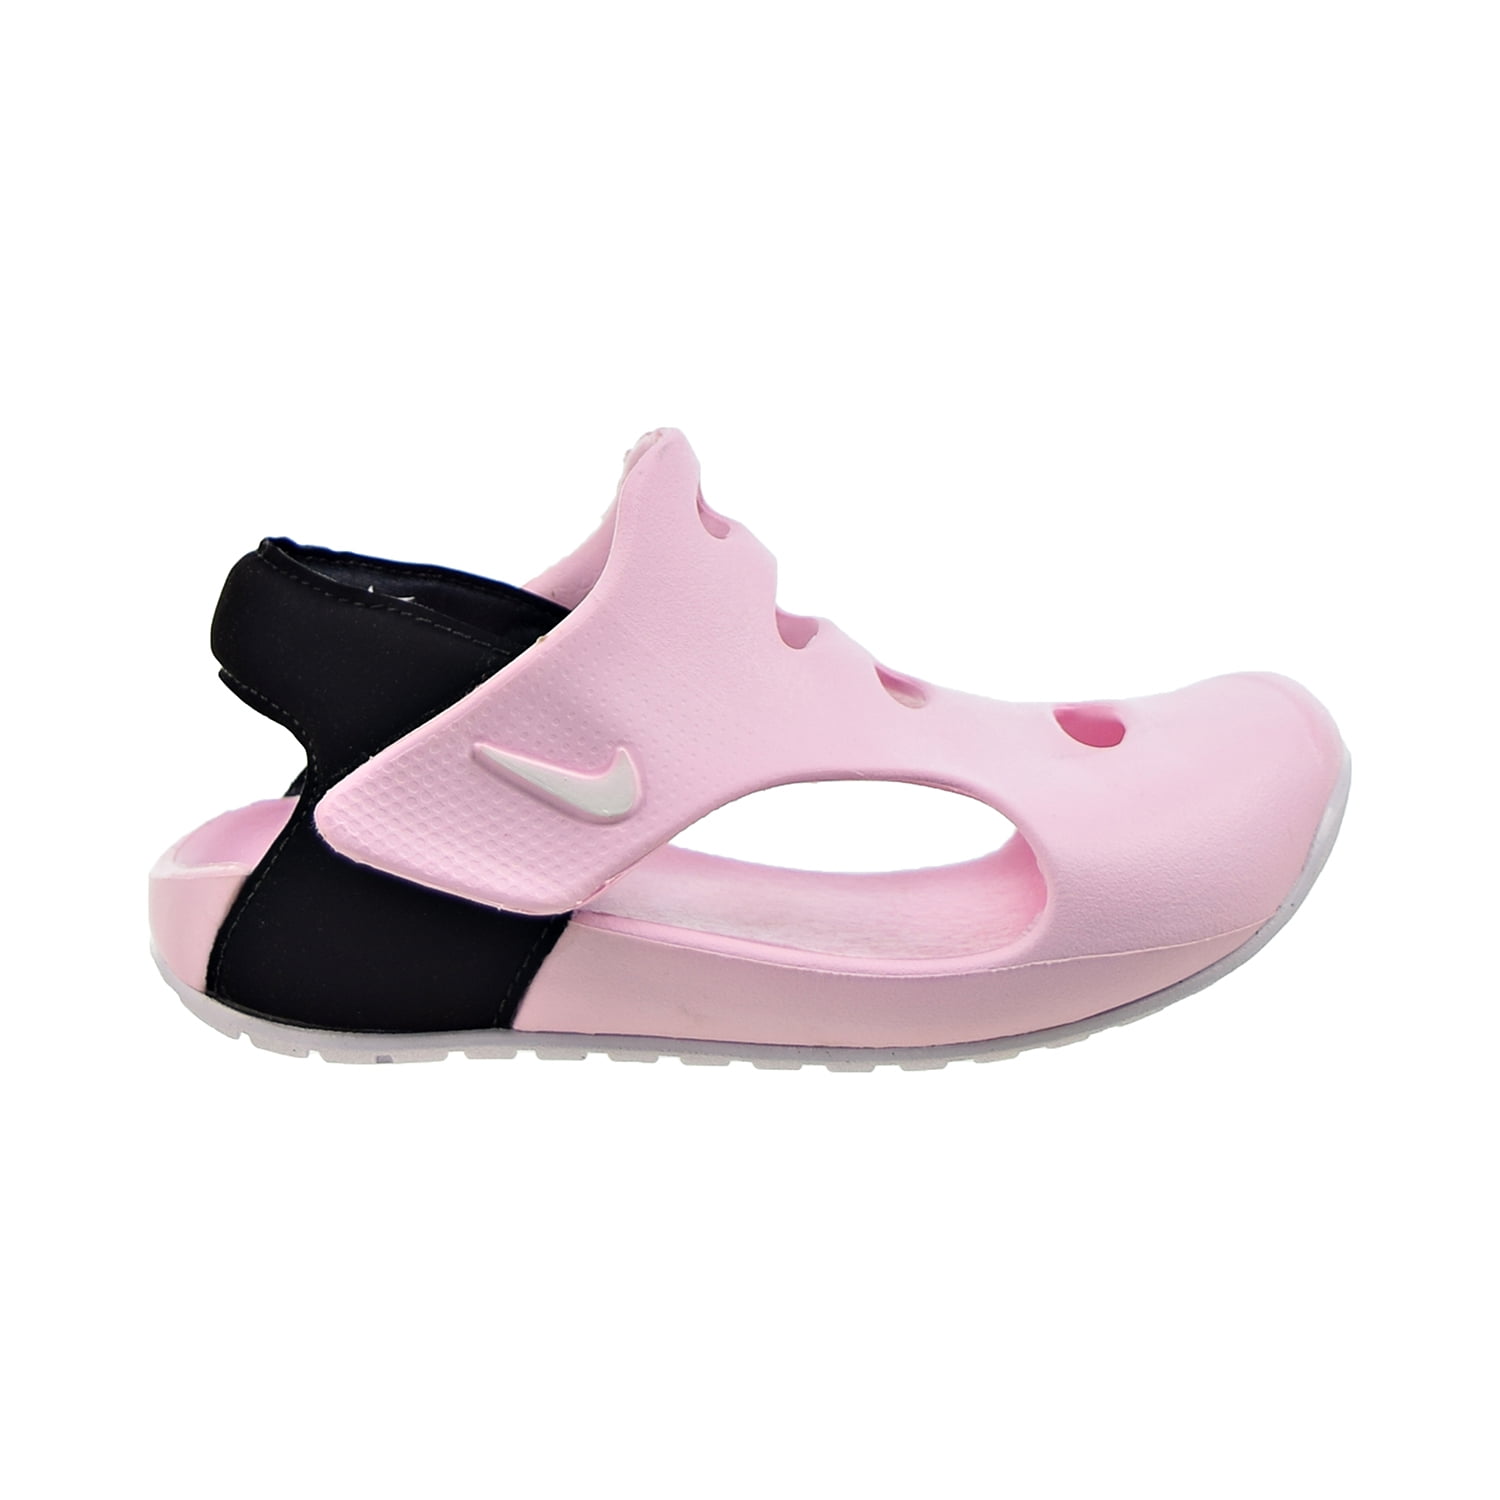 Nike Sunray Protect 3 (PS) Little Pink Foam-Black-White dh9462-601 -